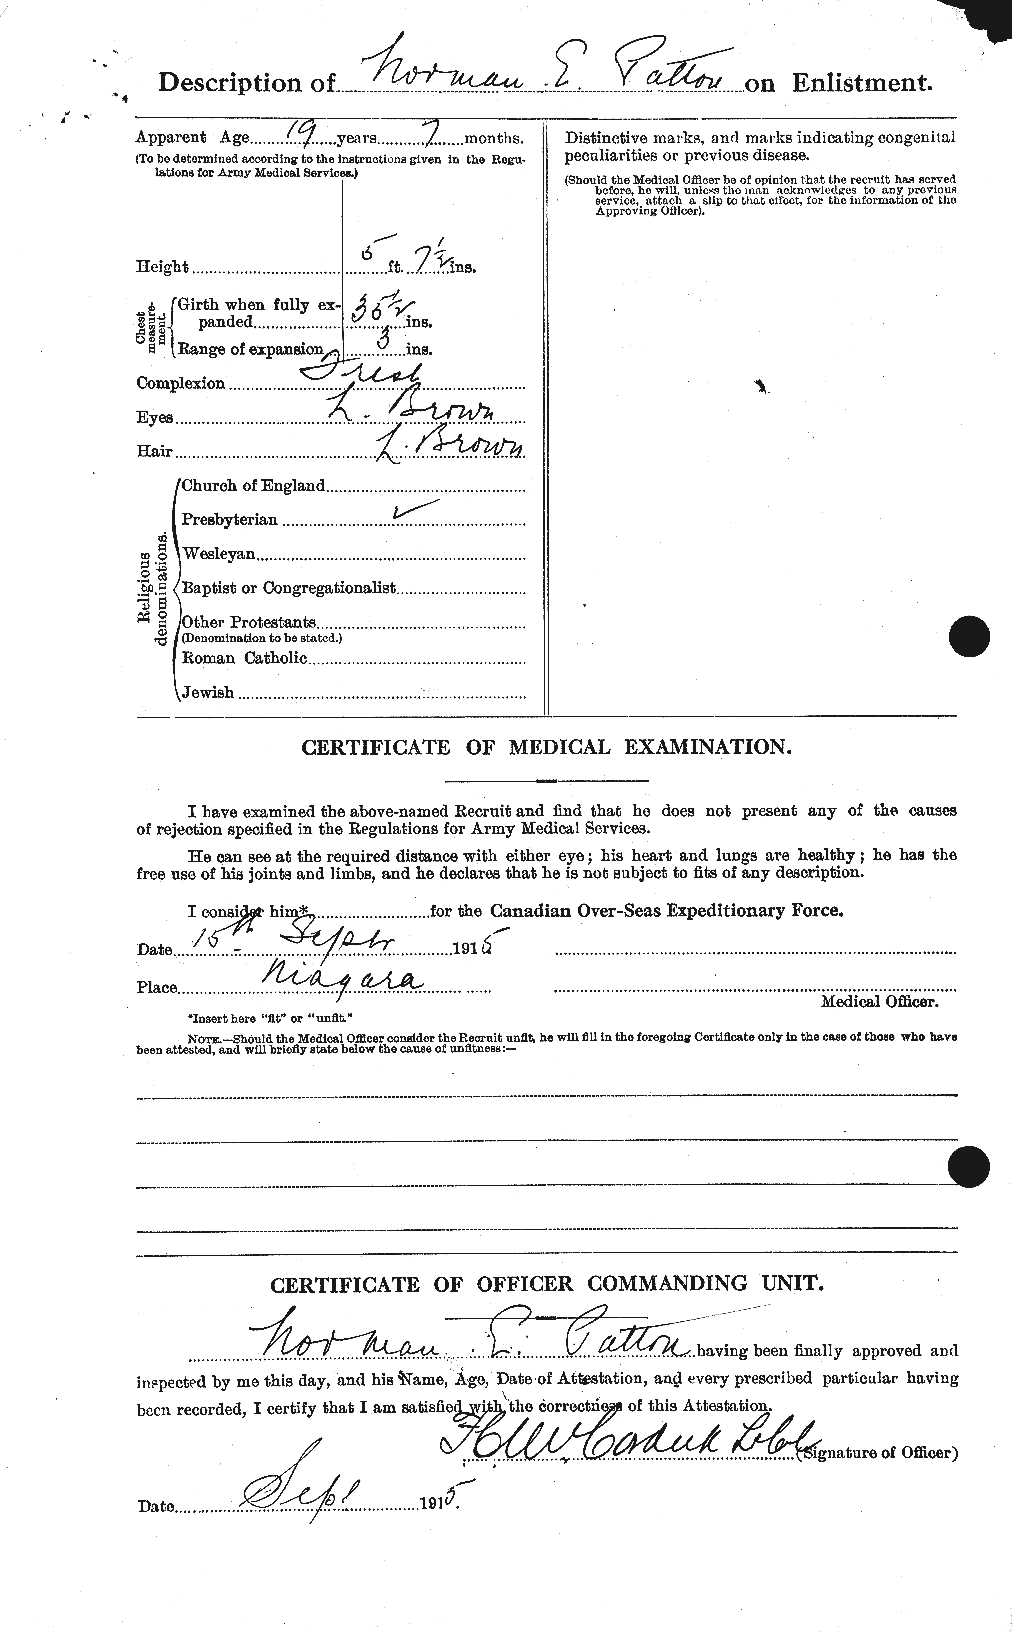 Personnel Records of the First World War - CEF 569059b